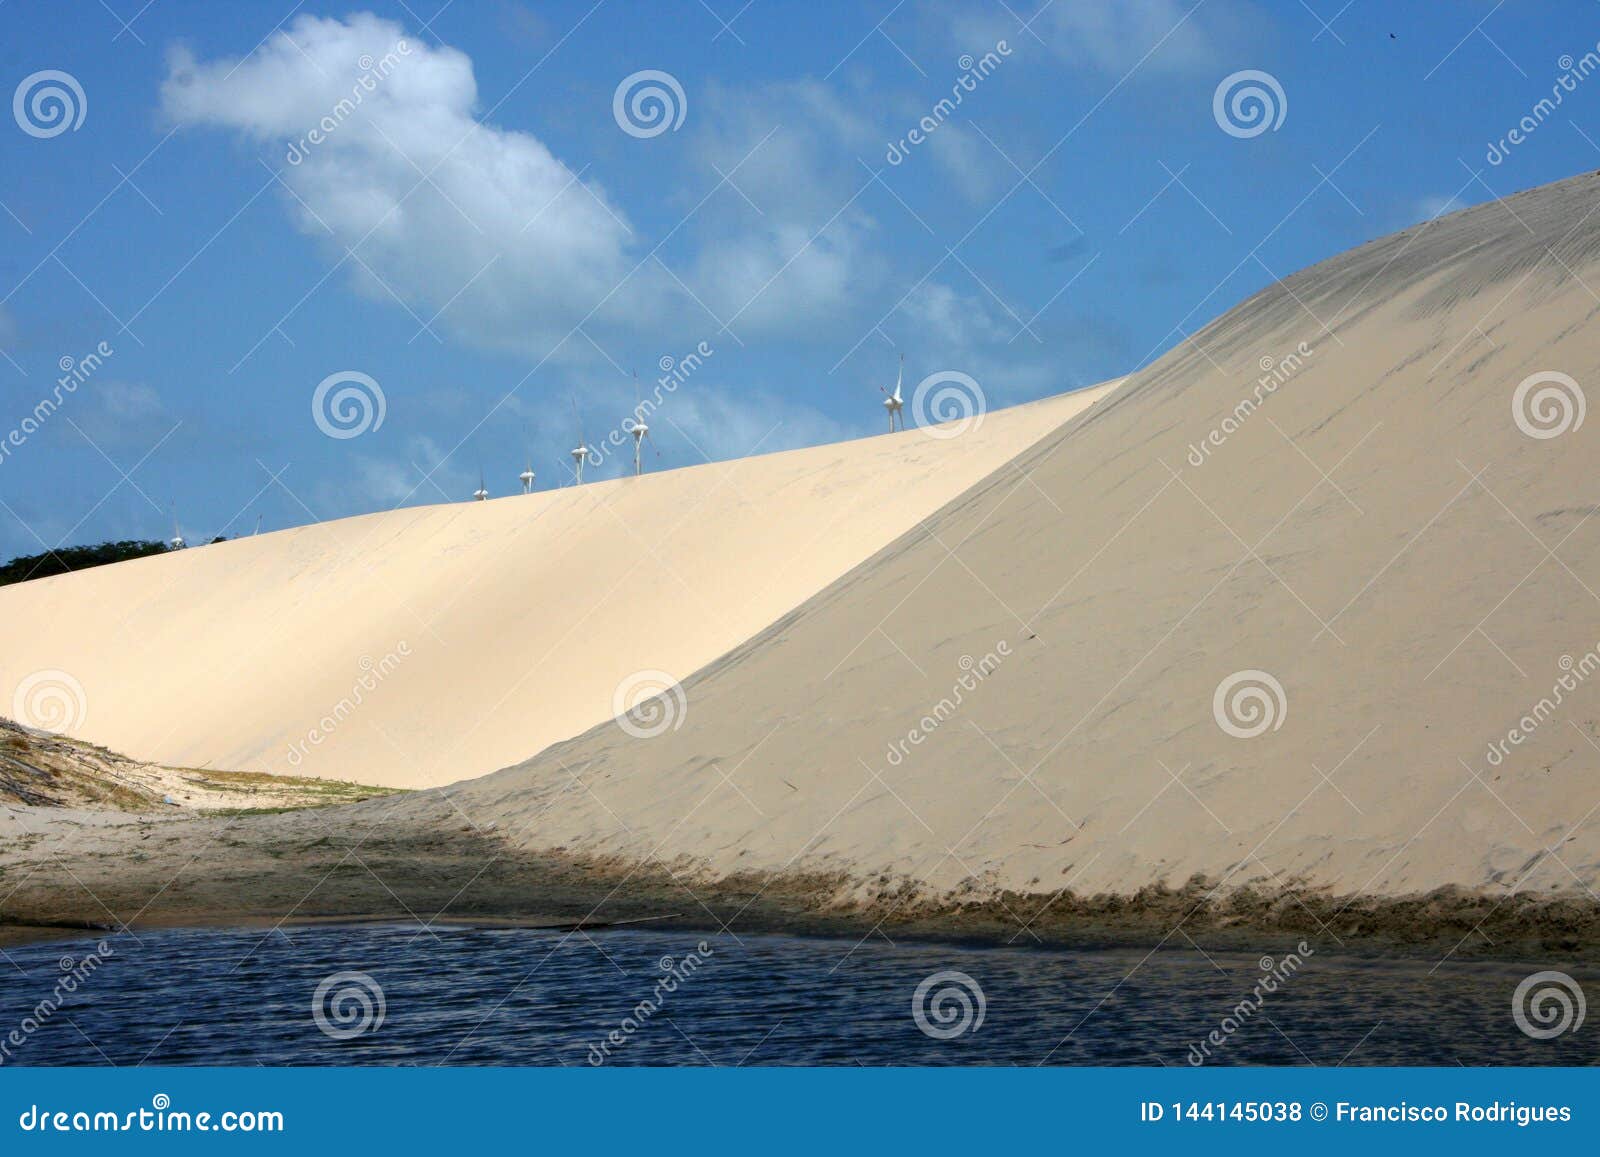 dunes and cliffs on the beach of beberibe